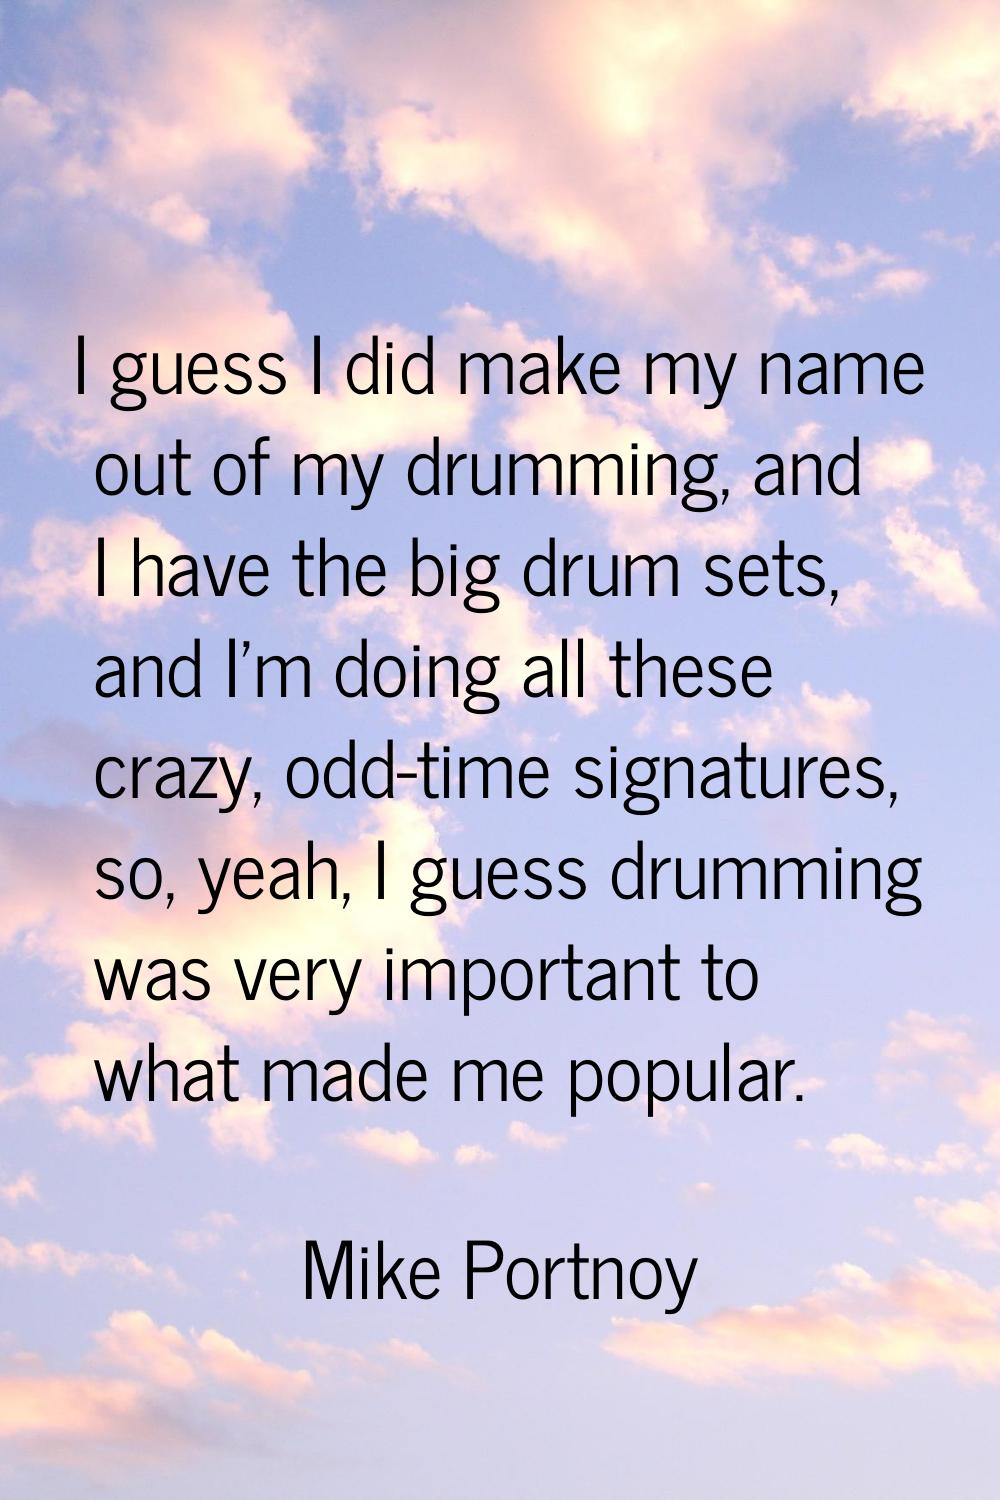 I guess I did make my name out of my drumming, and I have the big drum sets, and I'm doing all thes